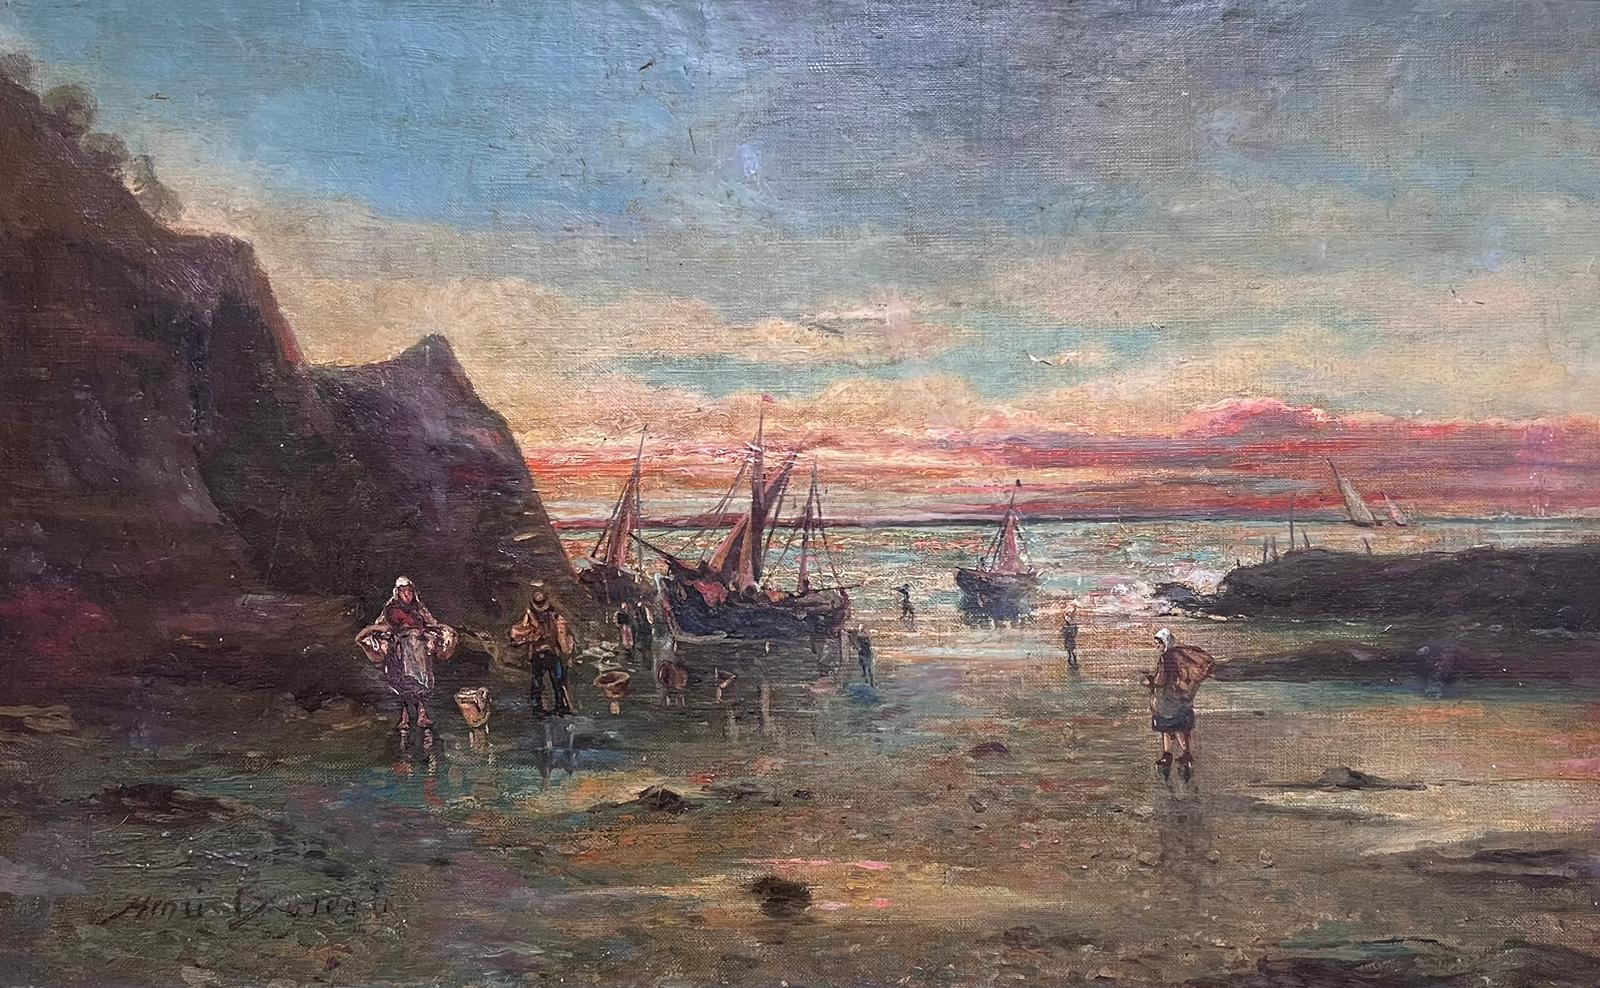 Bringing in the Catch
French artist, 19th century
indistinctly signed oil on canvas, framed
framed: 19.5 x 29 inches
canvas: 16 x 25 inches
provenance: private collection, France
condition: very good and sound condition 